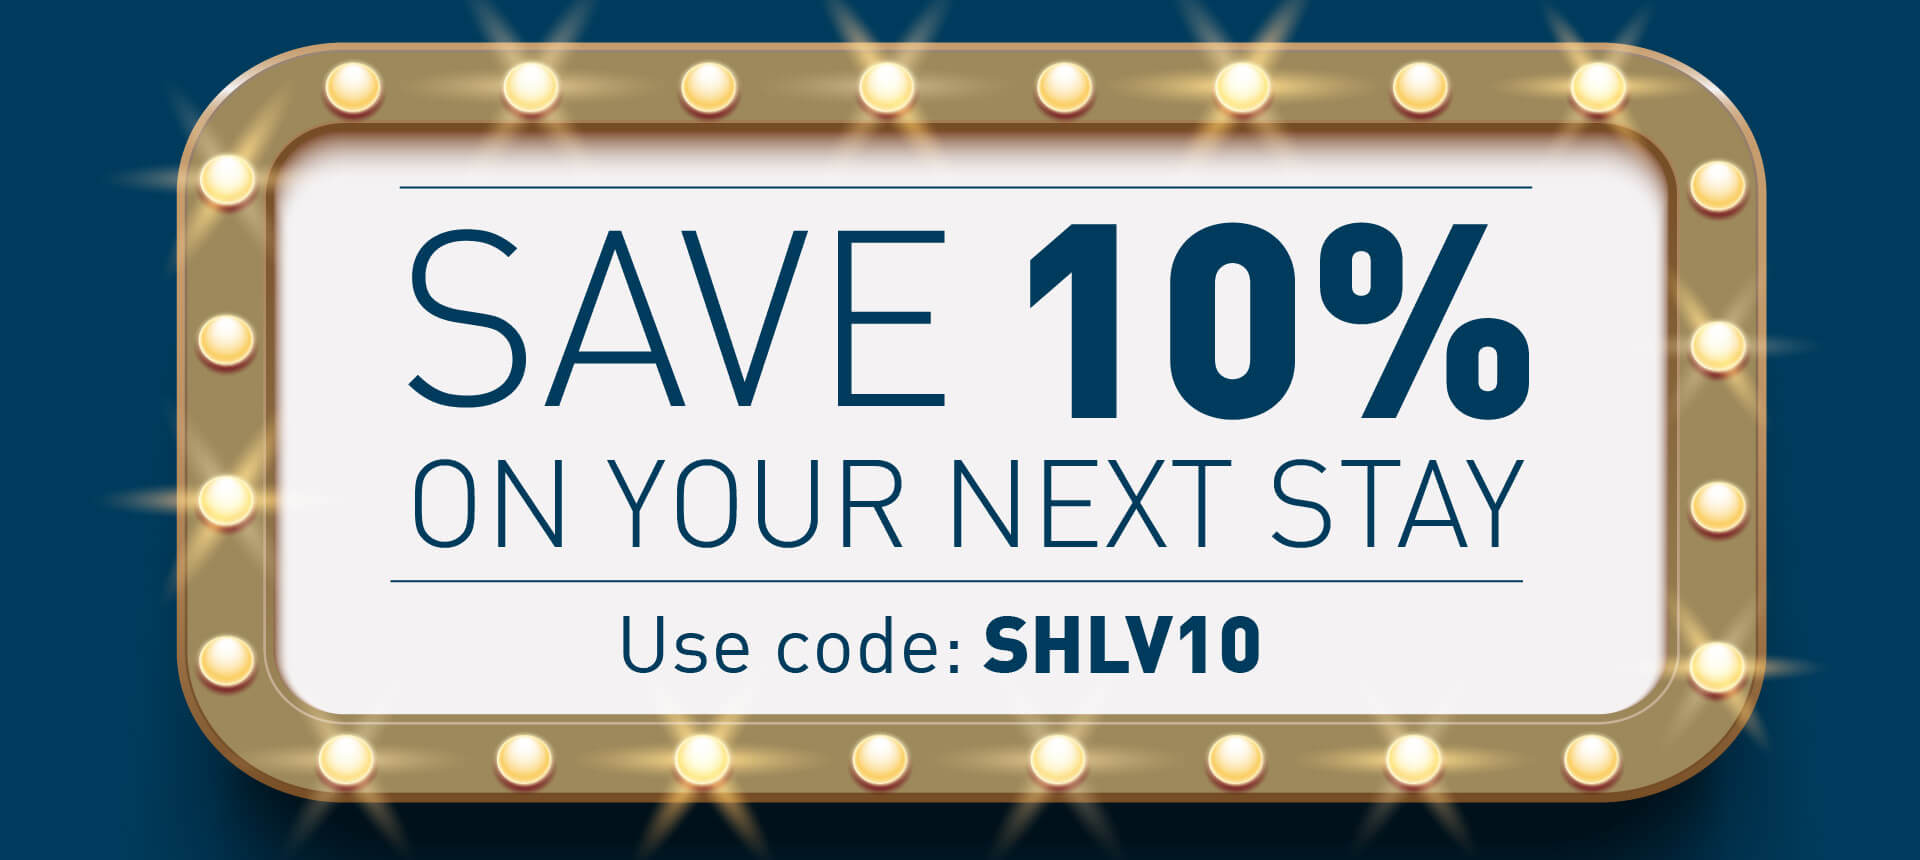 Save 10% on Your Next Stay at at Sidney Hotel London